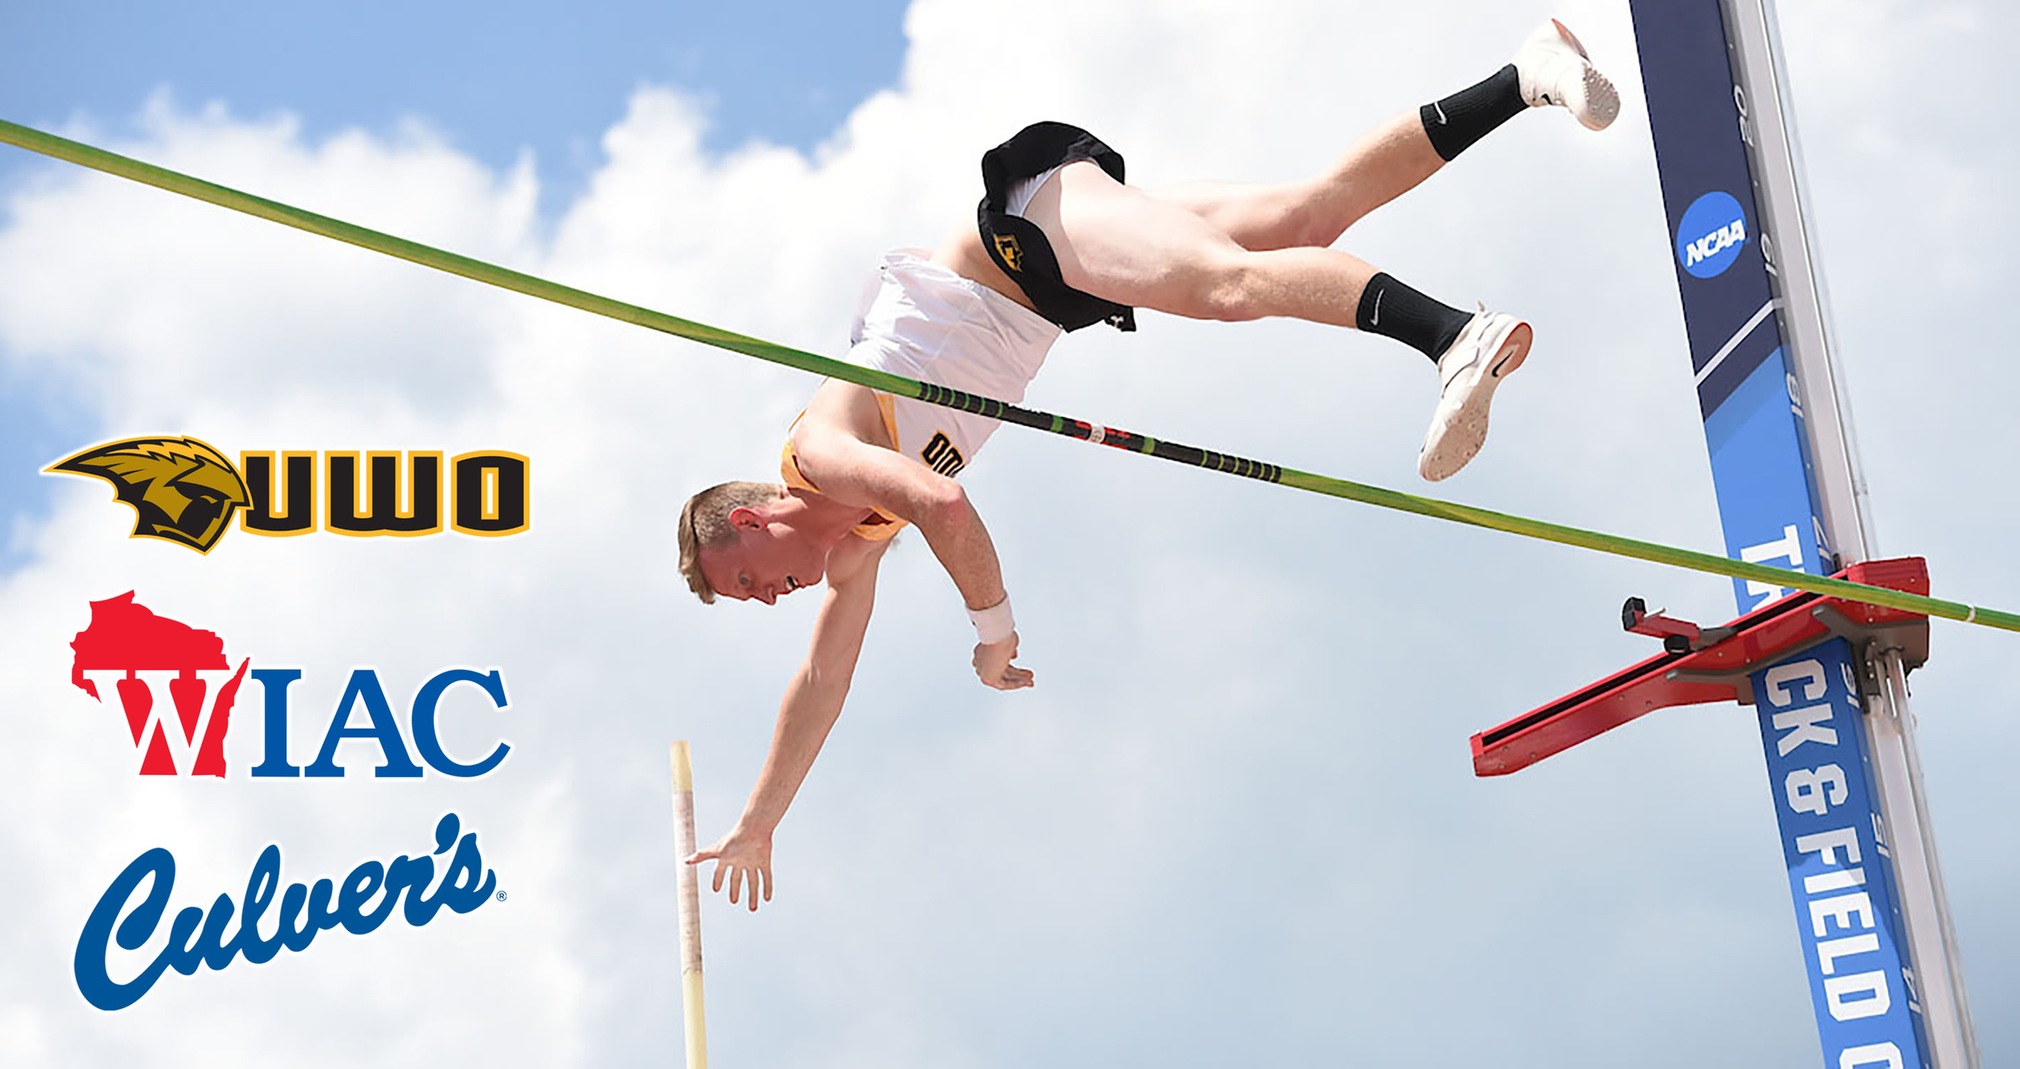 Joe Vils earned All-America honors in the pole vault at the 2018 and 2019 NCAA Division III Outdoor Track & Field Championships.